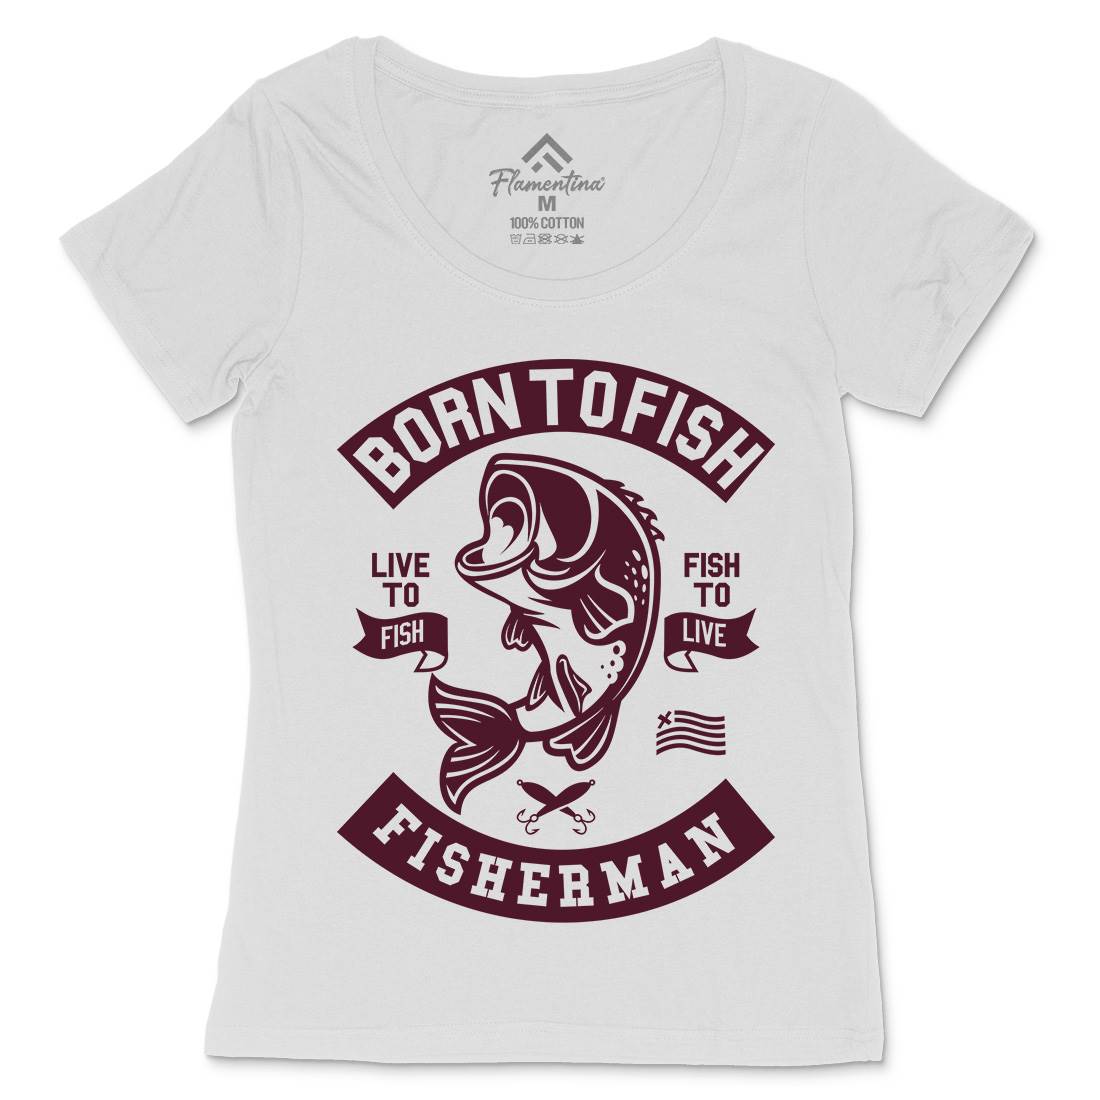 Born To Fish Womens Scoop Neck T-Shirt Fishing A208